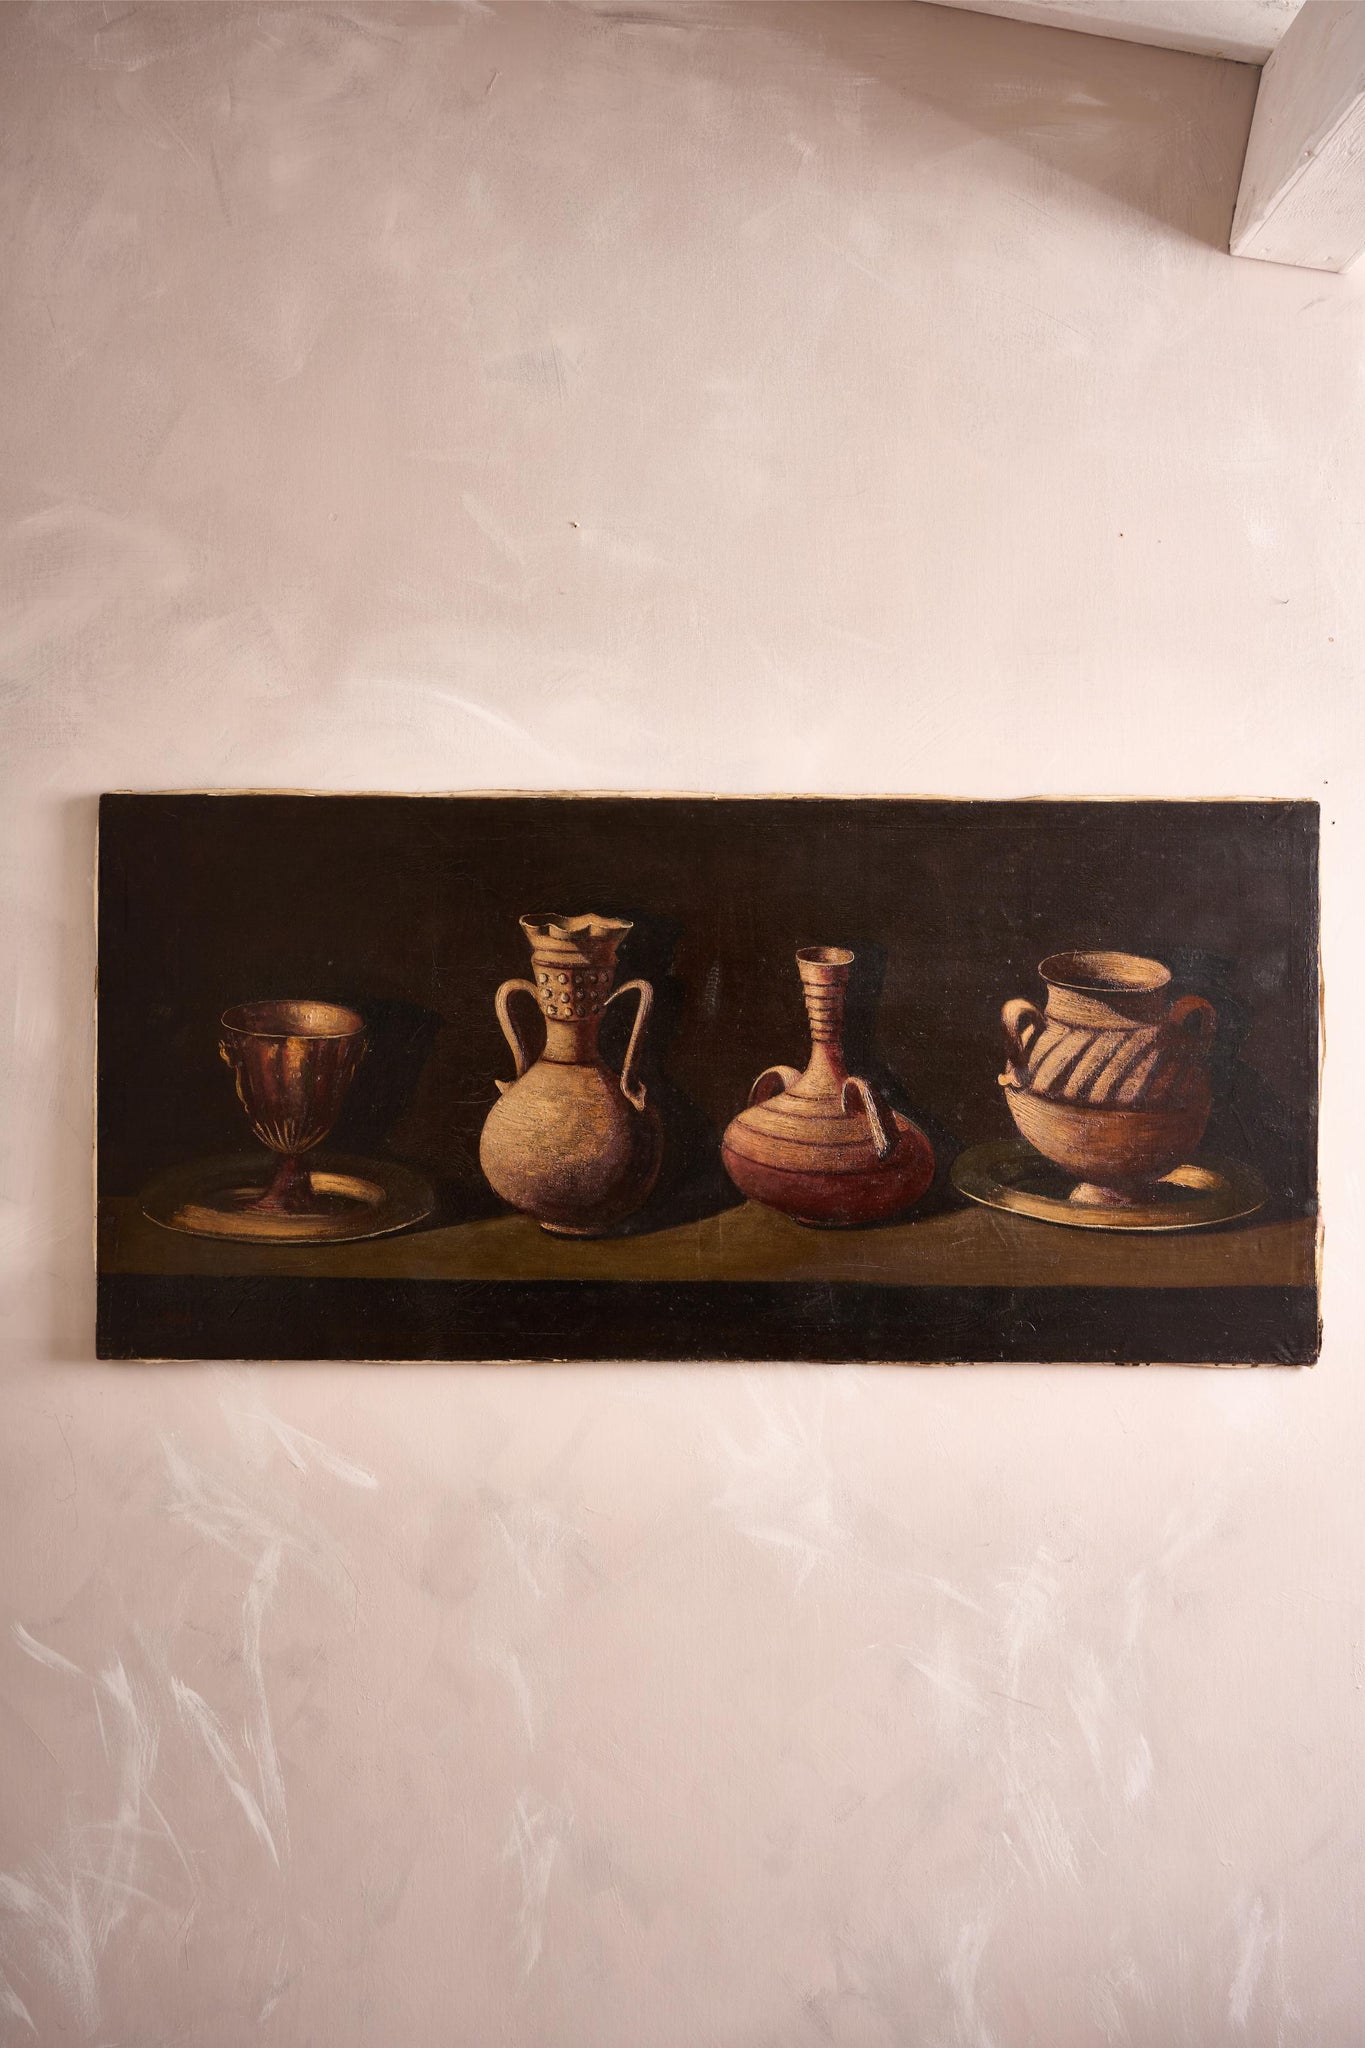 Large 20th century oil on canvas painting of 4 pots